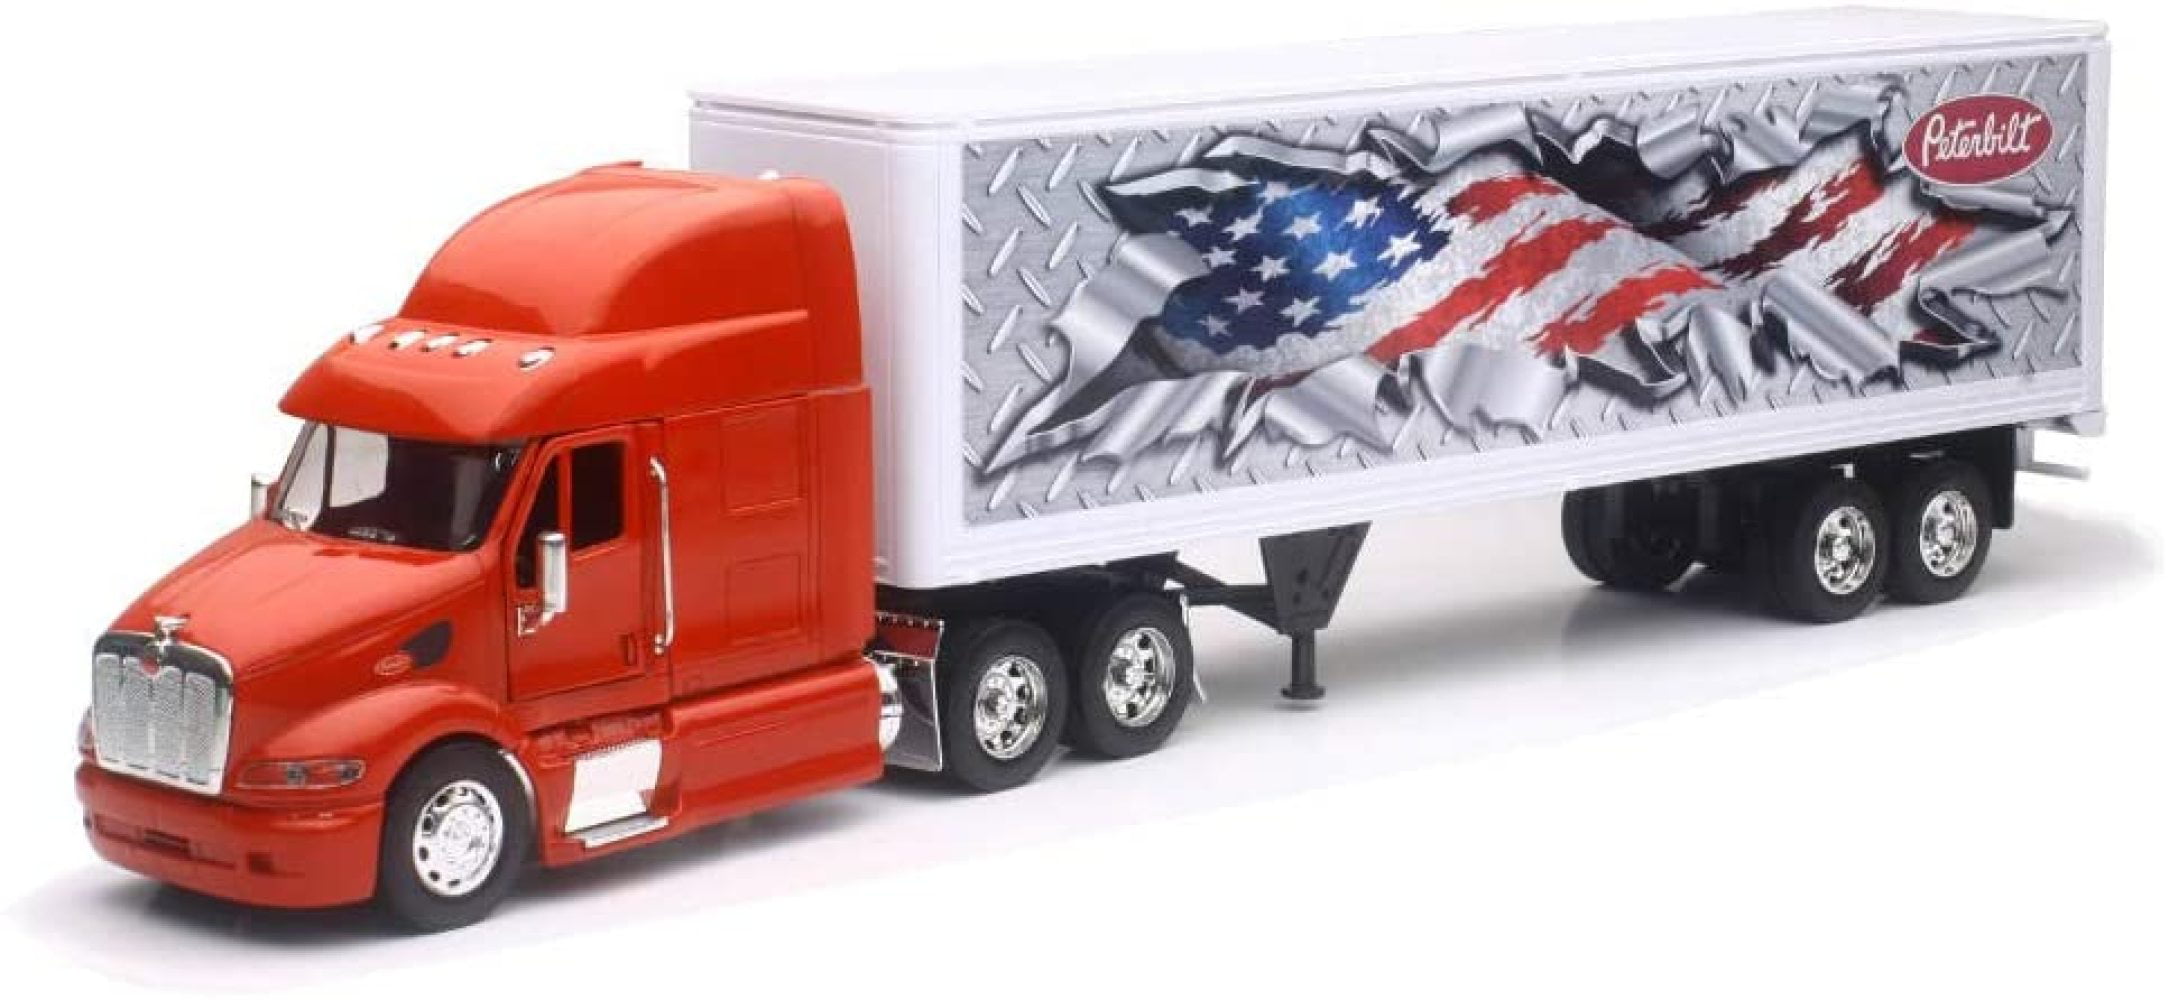 Fast Lane 1:32 Scale Die-Cast Mighty Haulers - Support Our Troops Red Truck  with Trailer